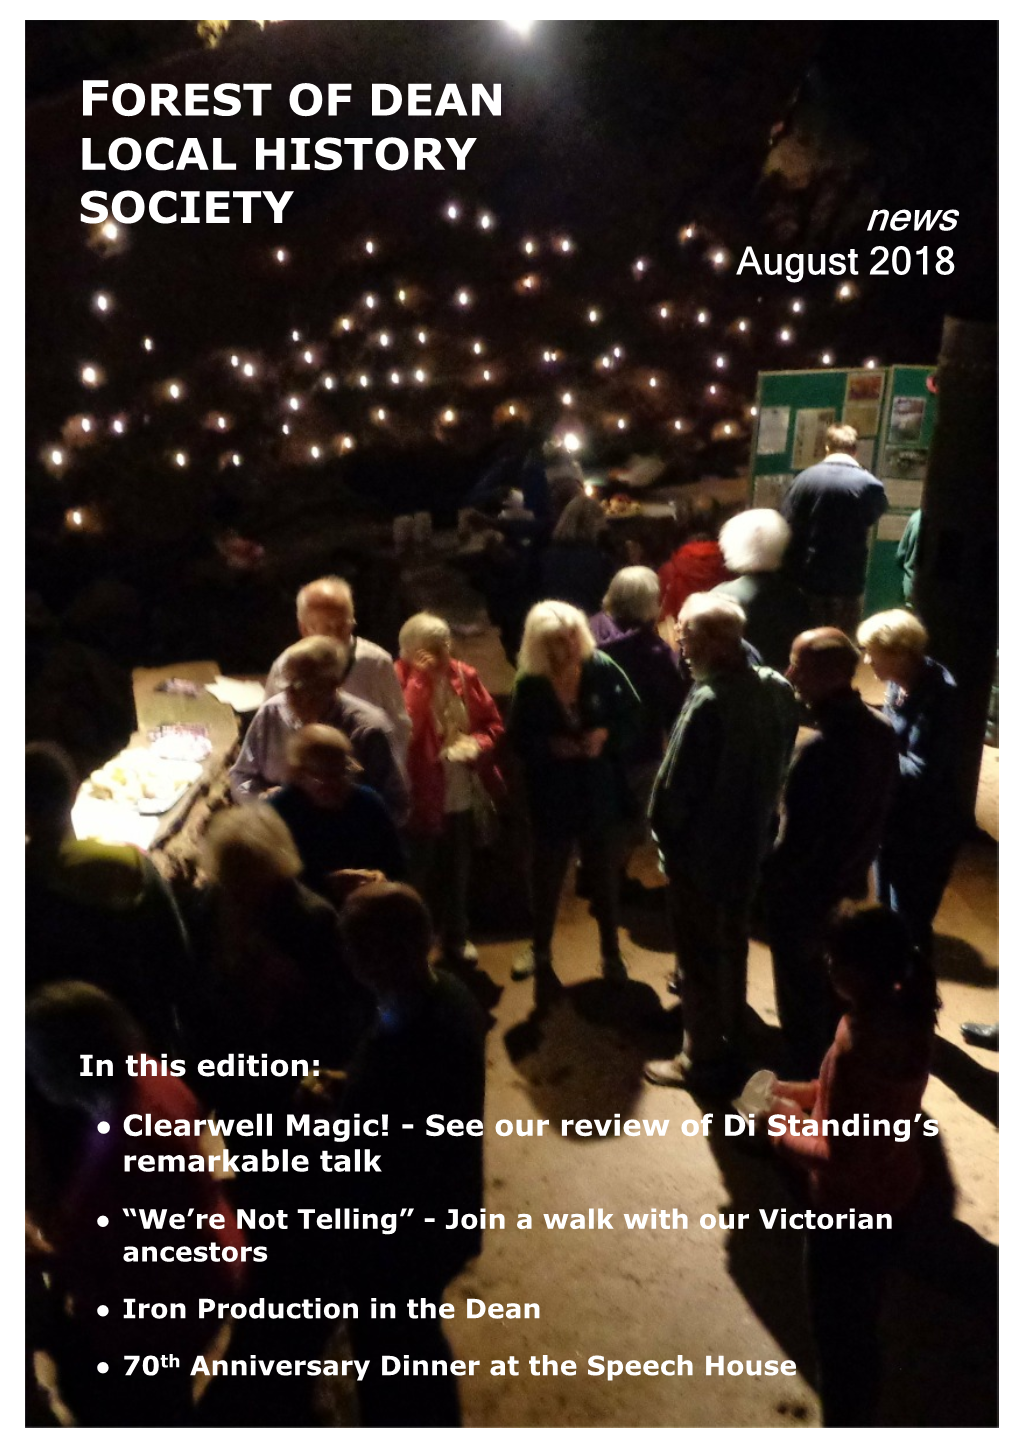 FODLHS Newsletter August 2018 for Download